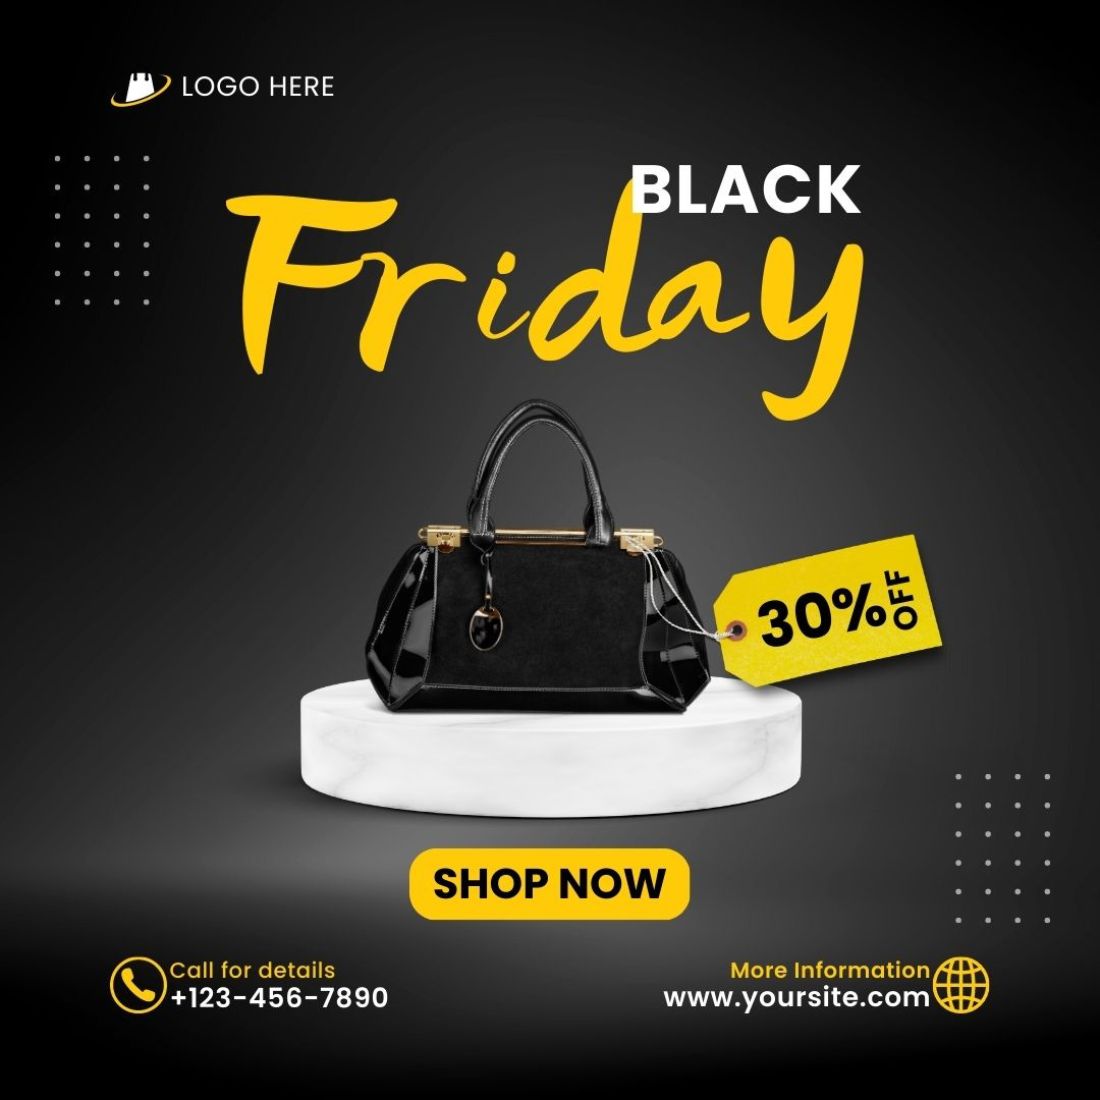 New Black Friday Sale Social Media Template cover image.